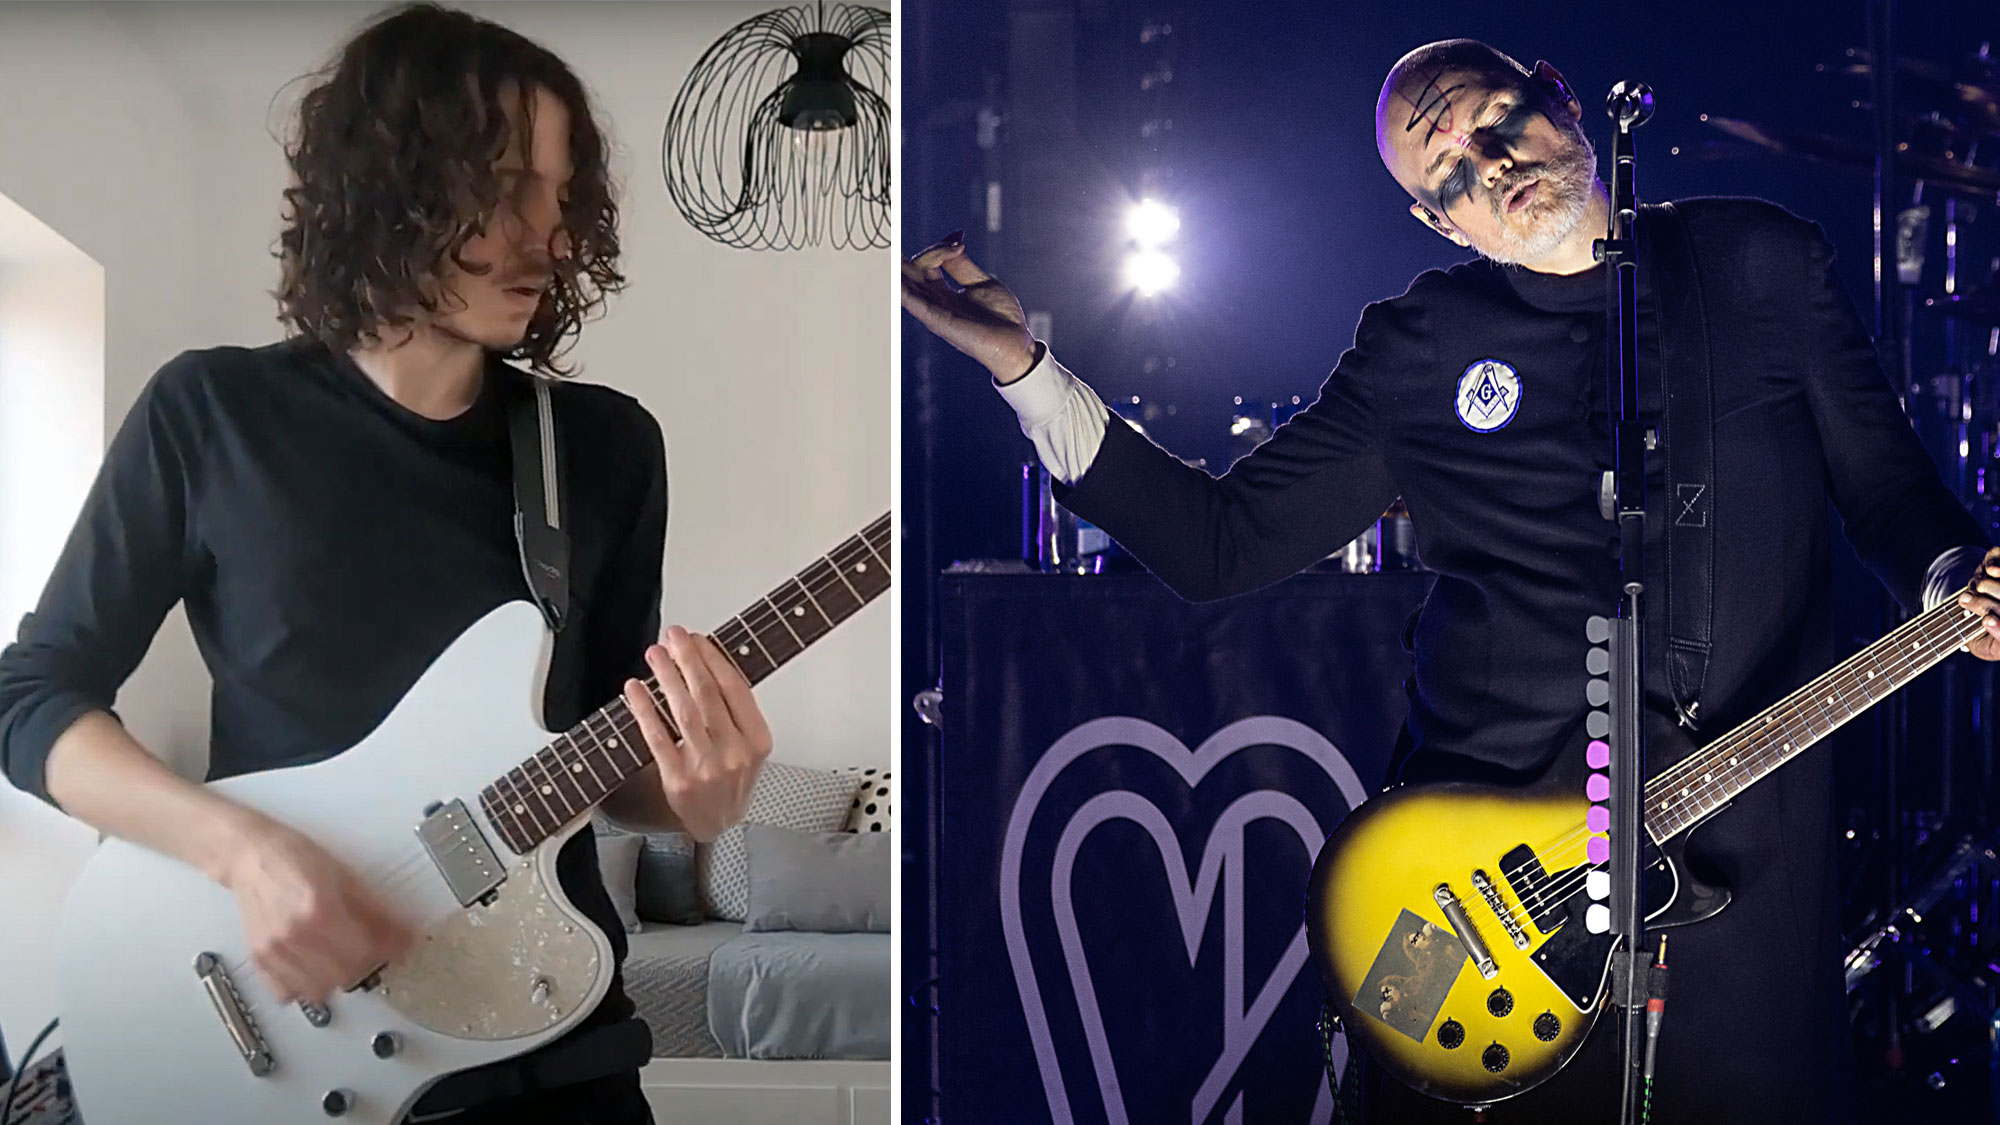 “It made me realize how grateful I am to have the guitar in my life”: I applied to be the new Smashing Pumpkins guitarist – I didn’t get the gig, but it was one of the most life-affirming experiences of my musical career